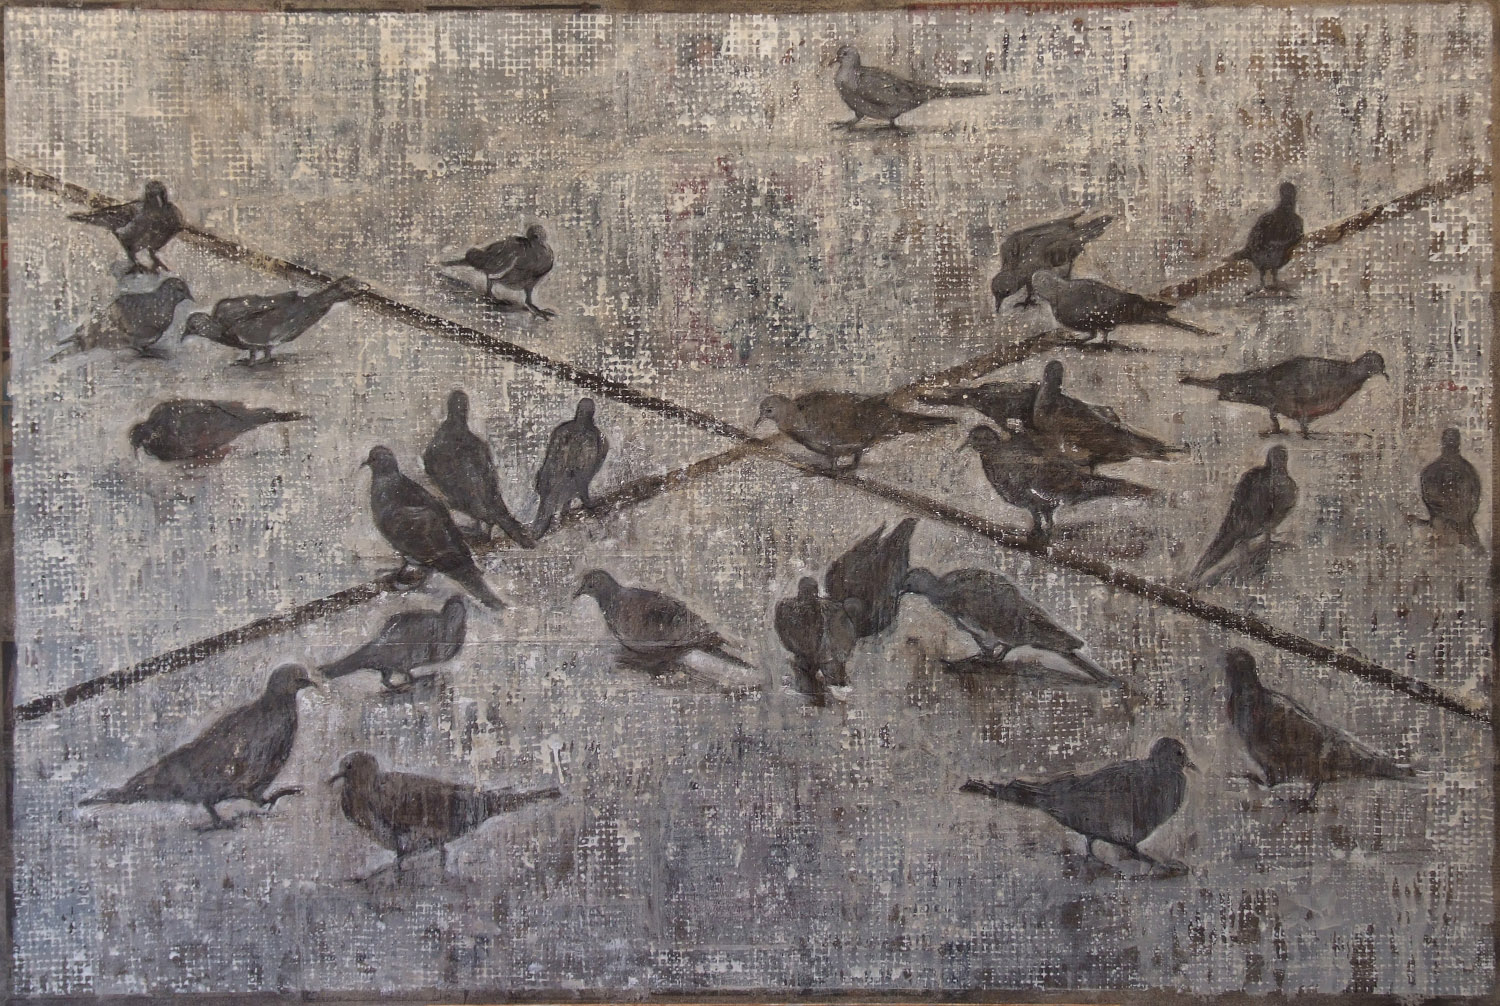 2an(0)-For the Birds-oil, wax, gesso, print media collage on canvas, 41x61, 2009.jpg